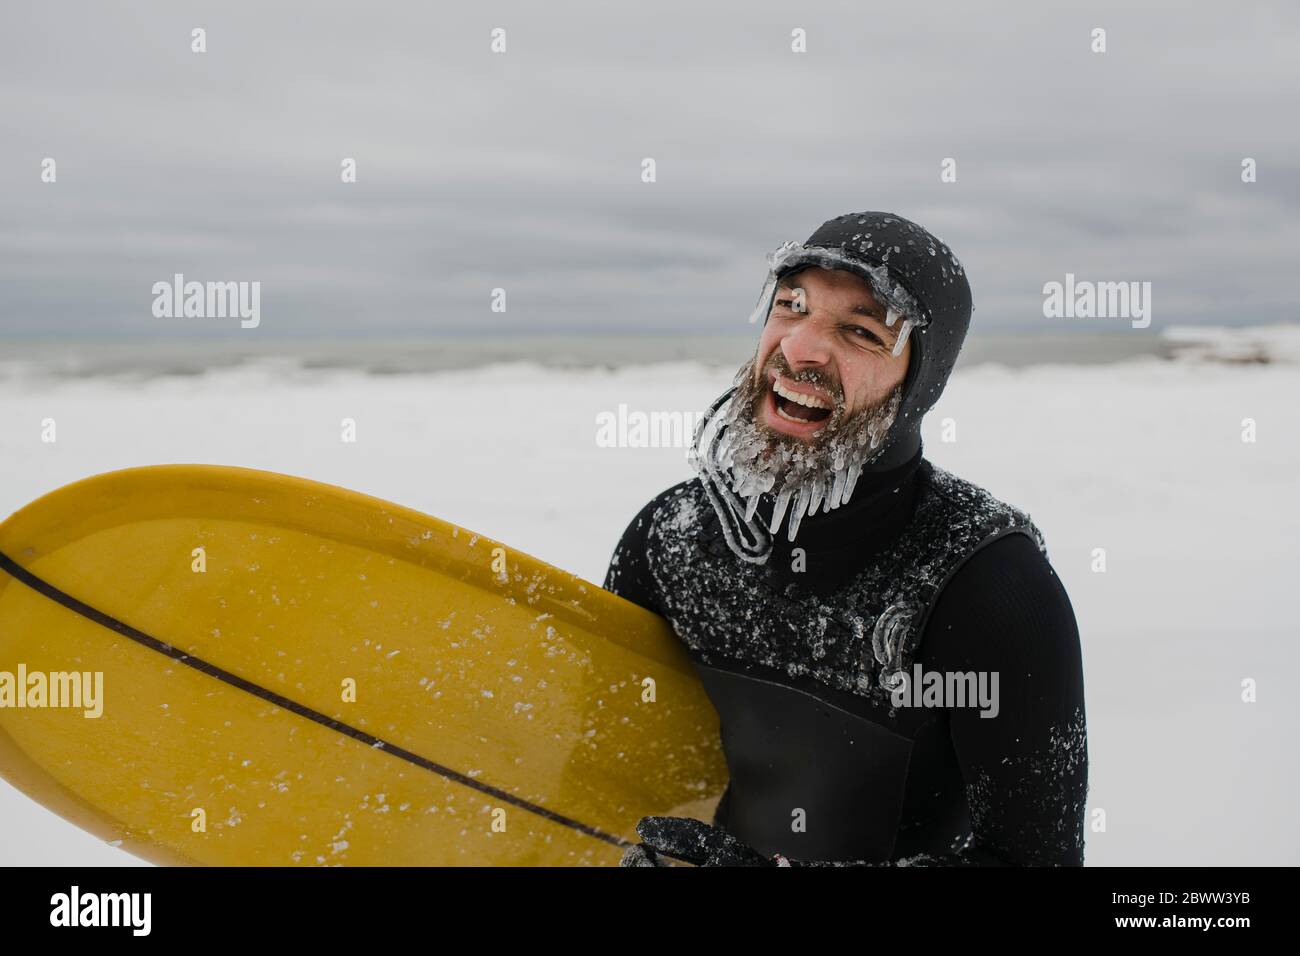 Surfer with surfboard in snow in Ontario, Canada Stock Photo